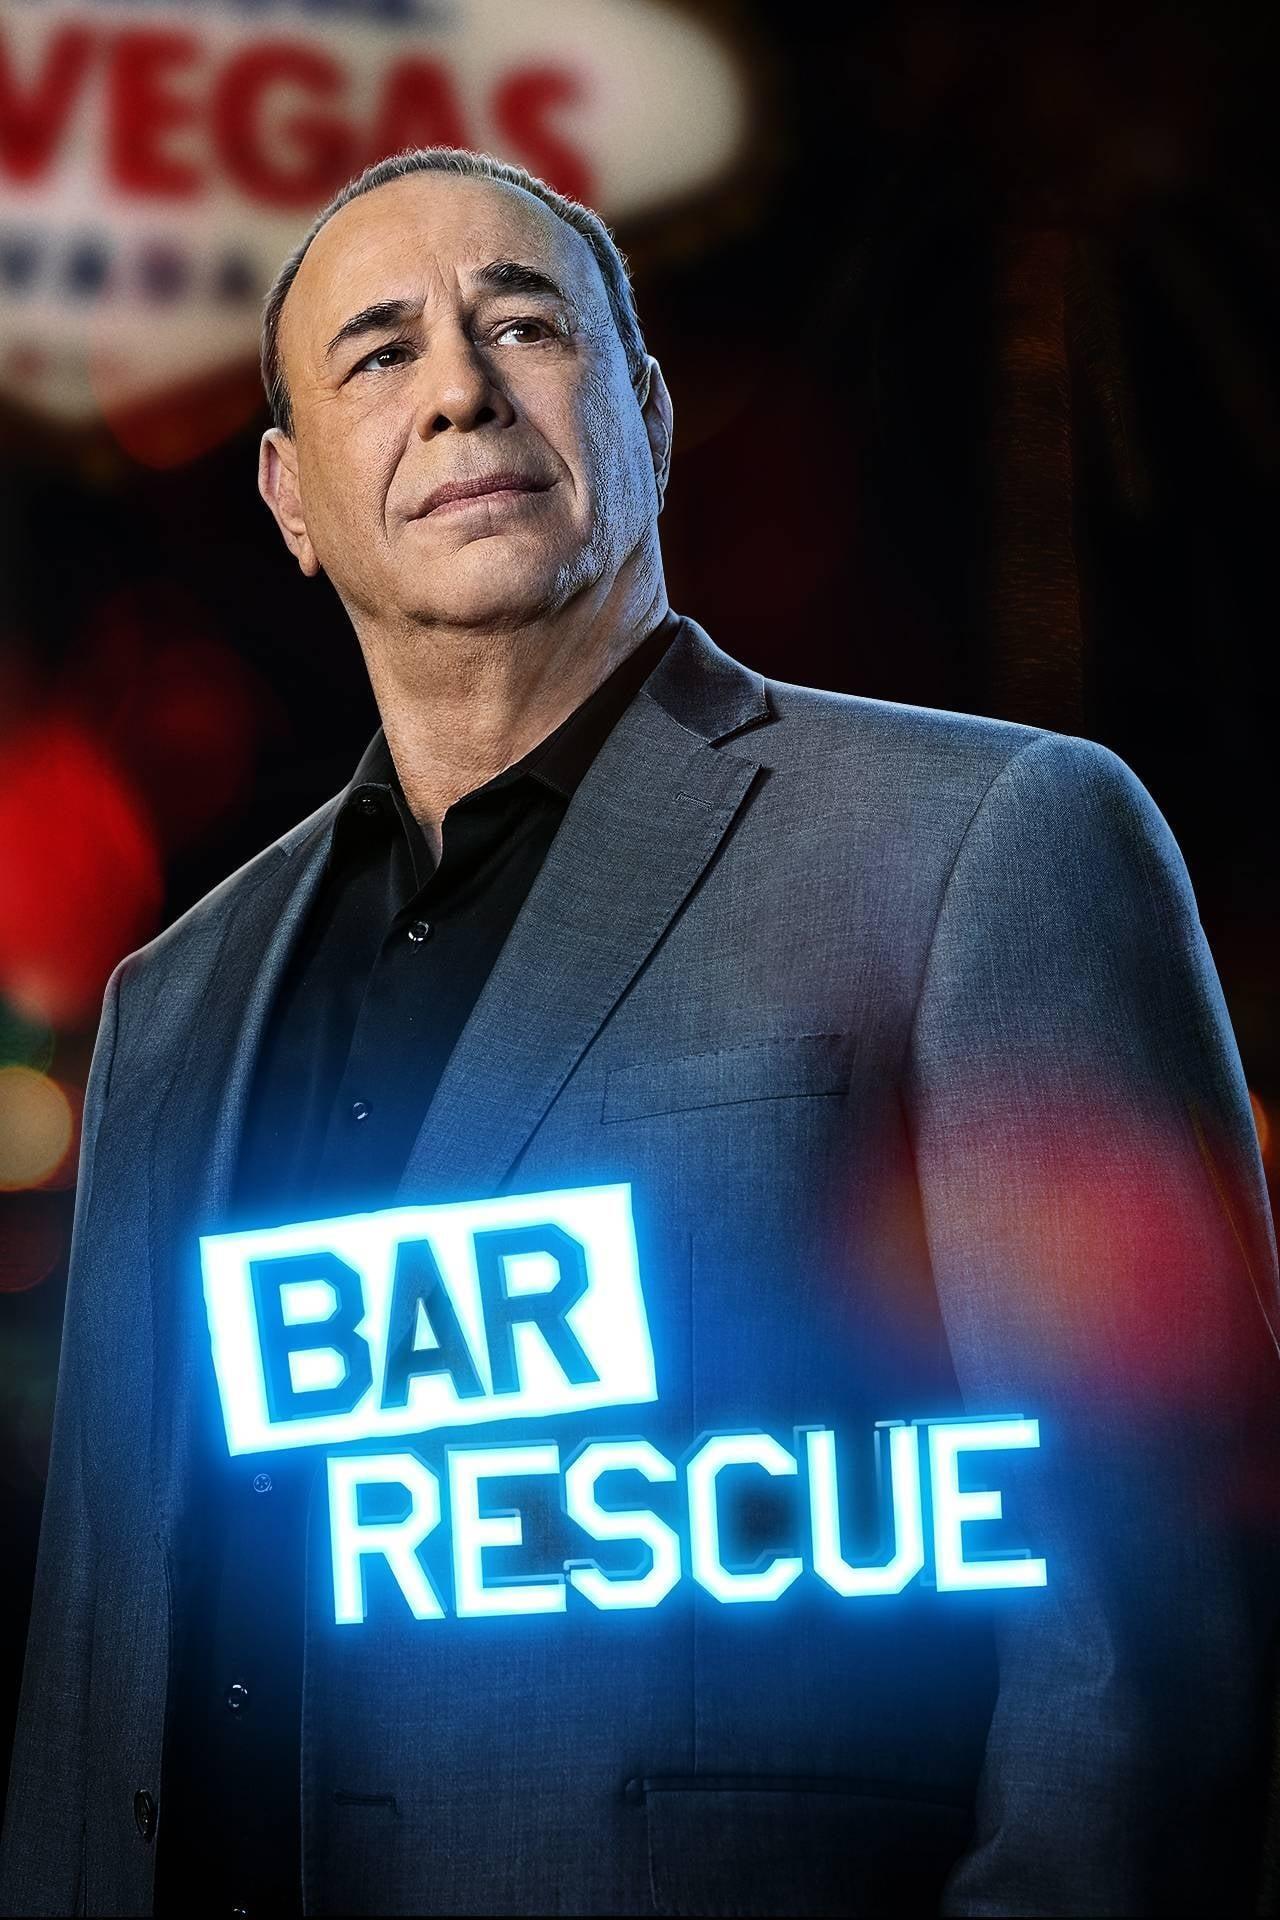 Bar Rescue poster